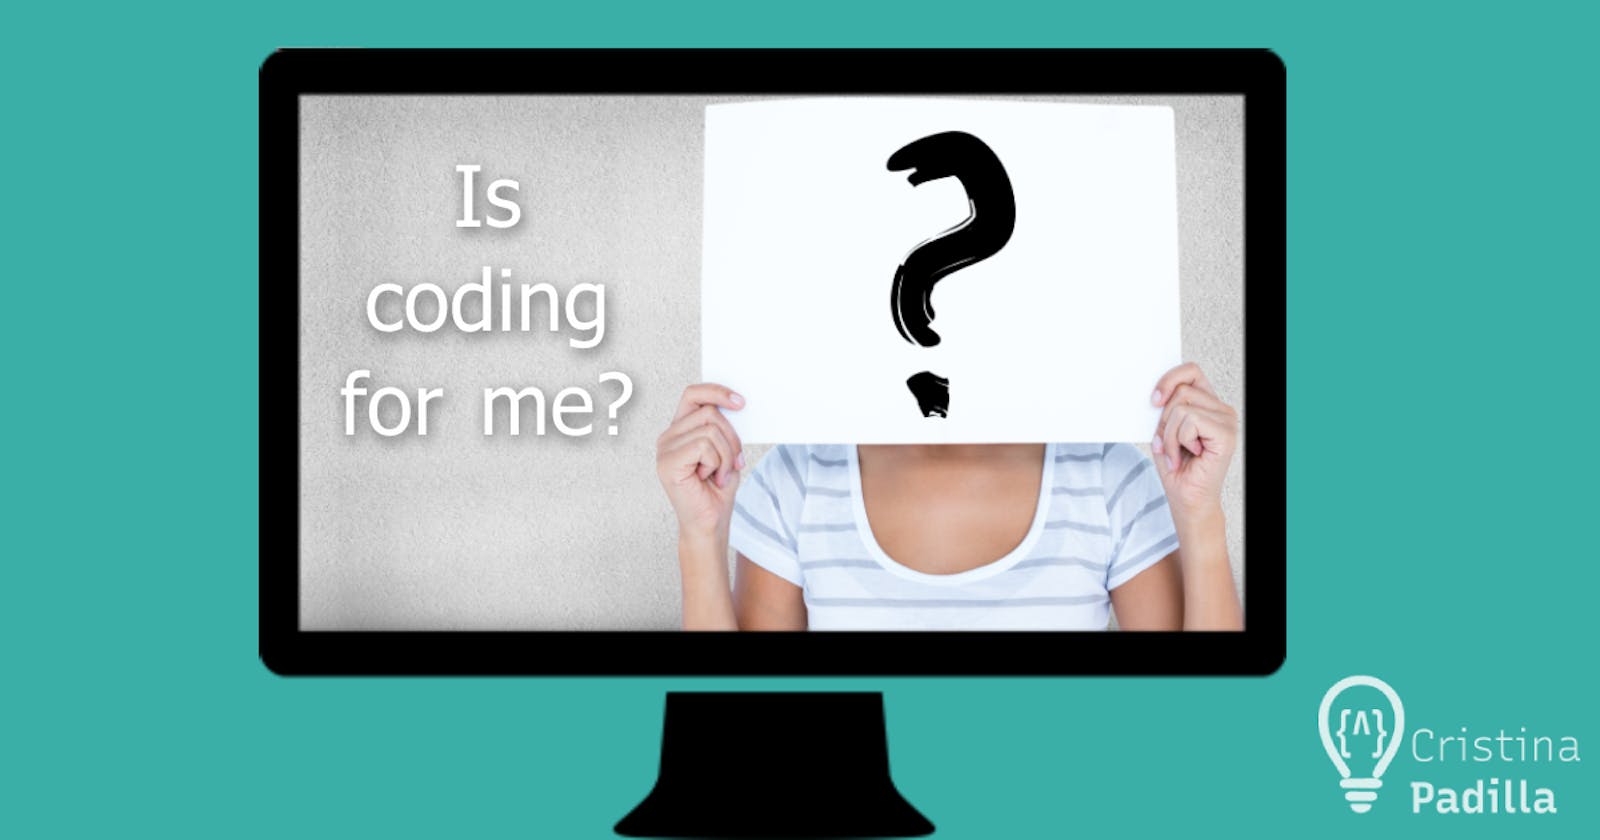 Is coding for me?